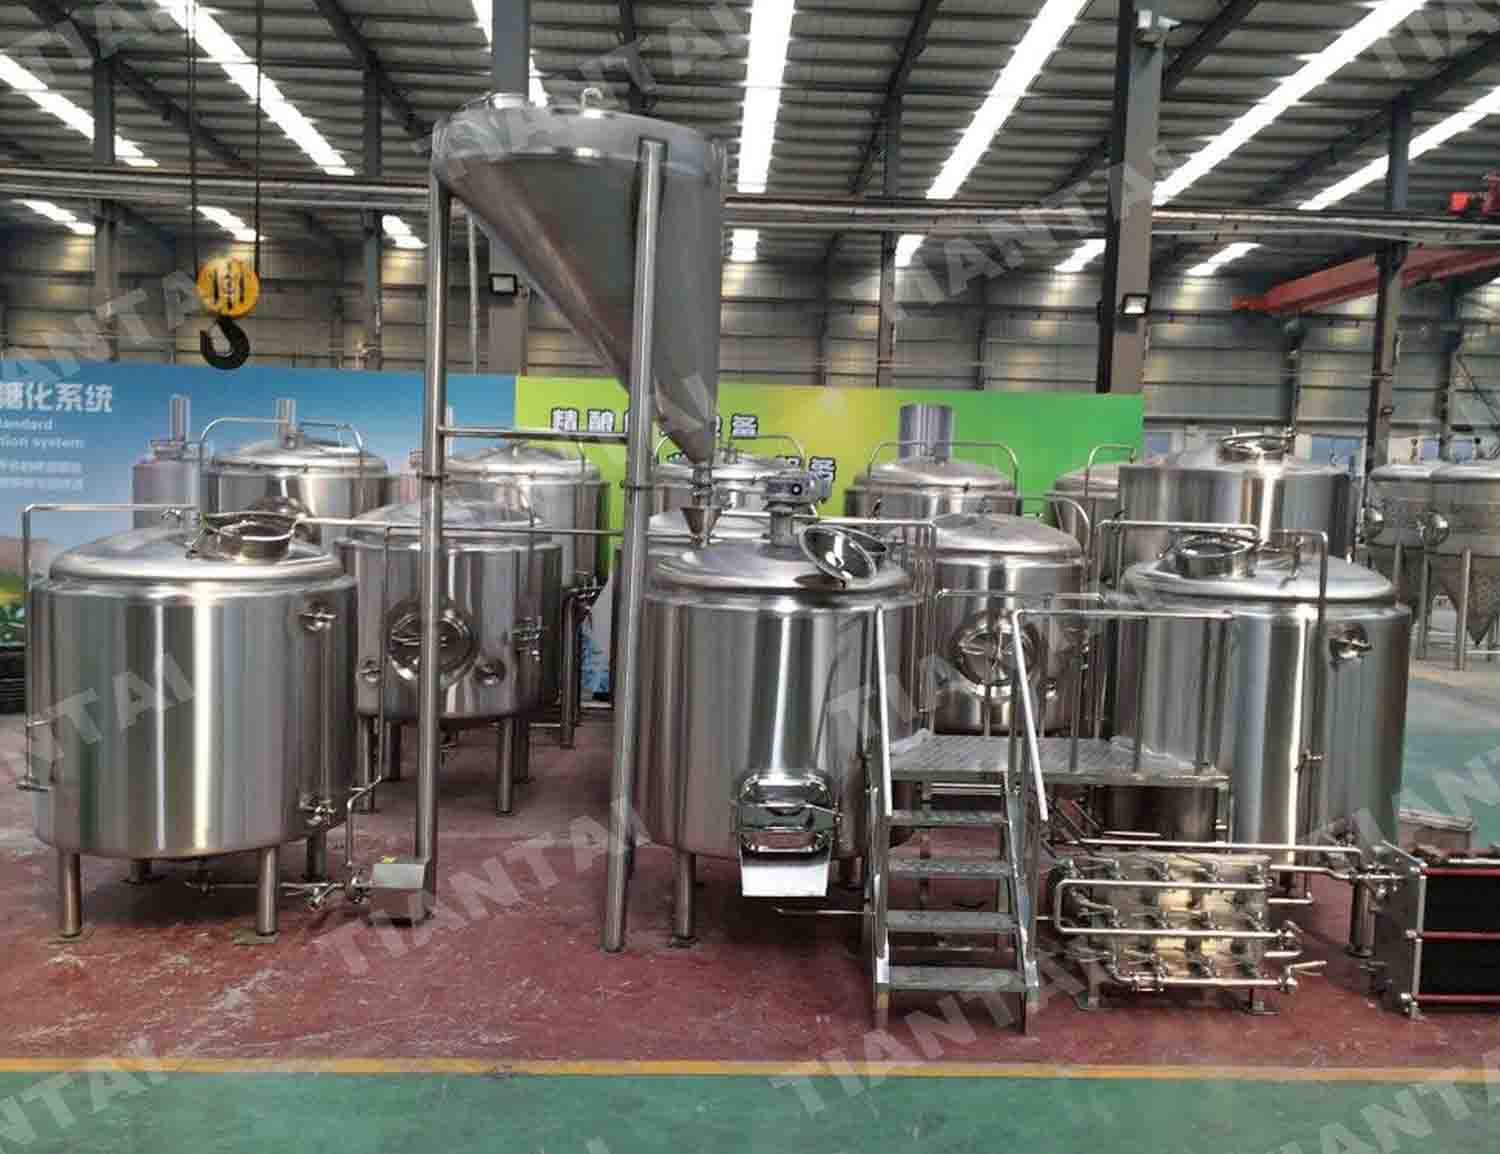 The turnkey 1500L brewery system